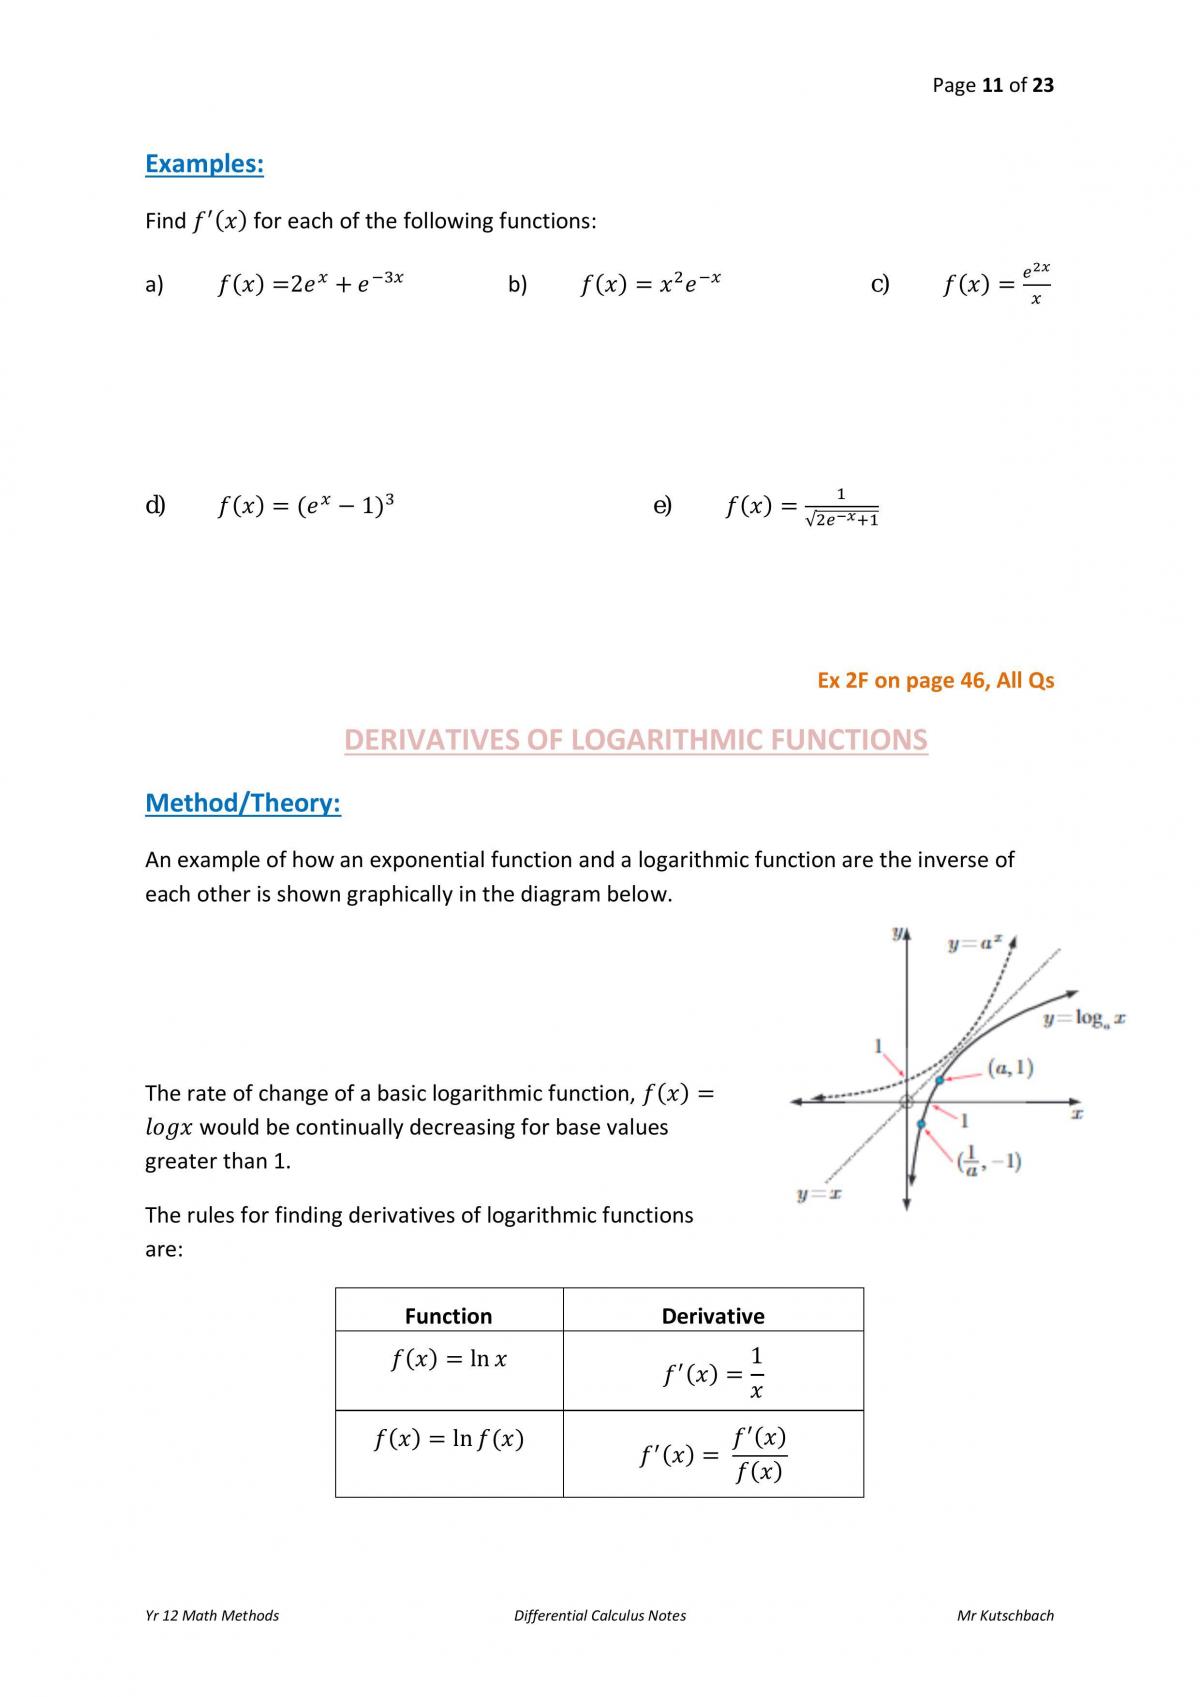 Differential Calculus Notes - Page 11